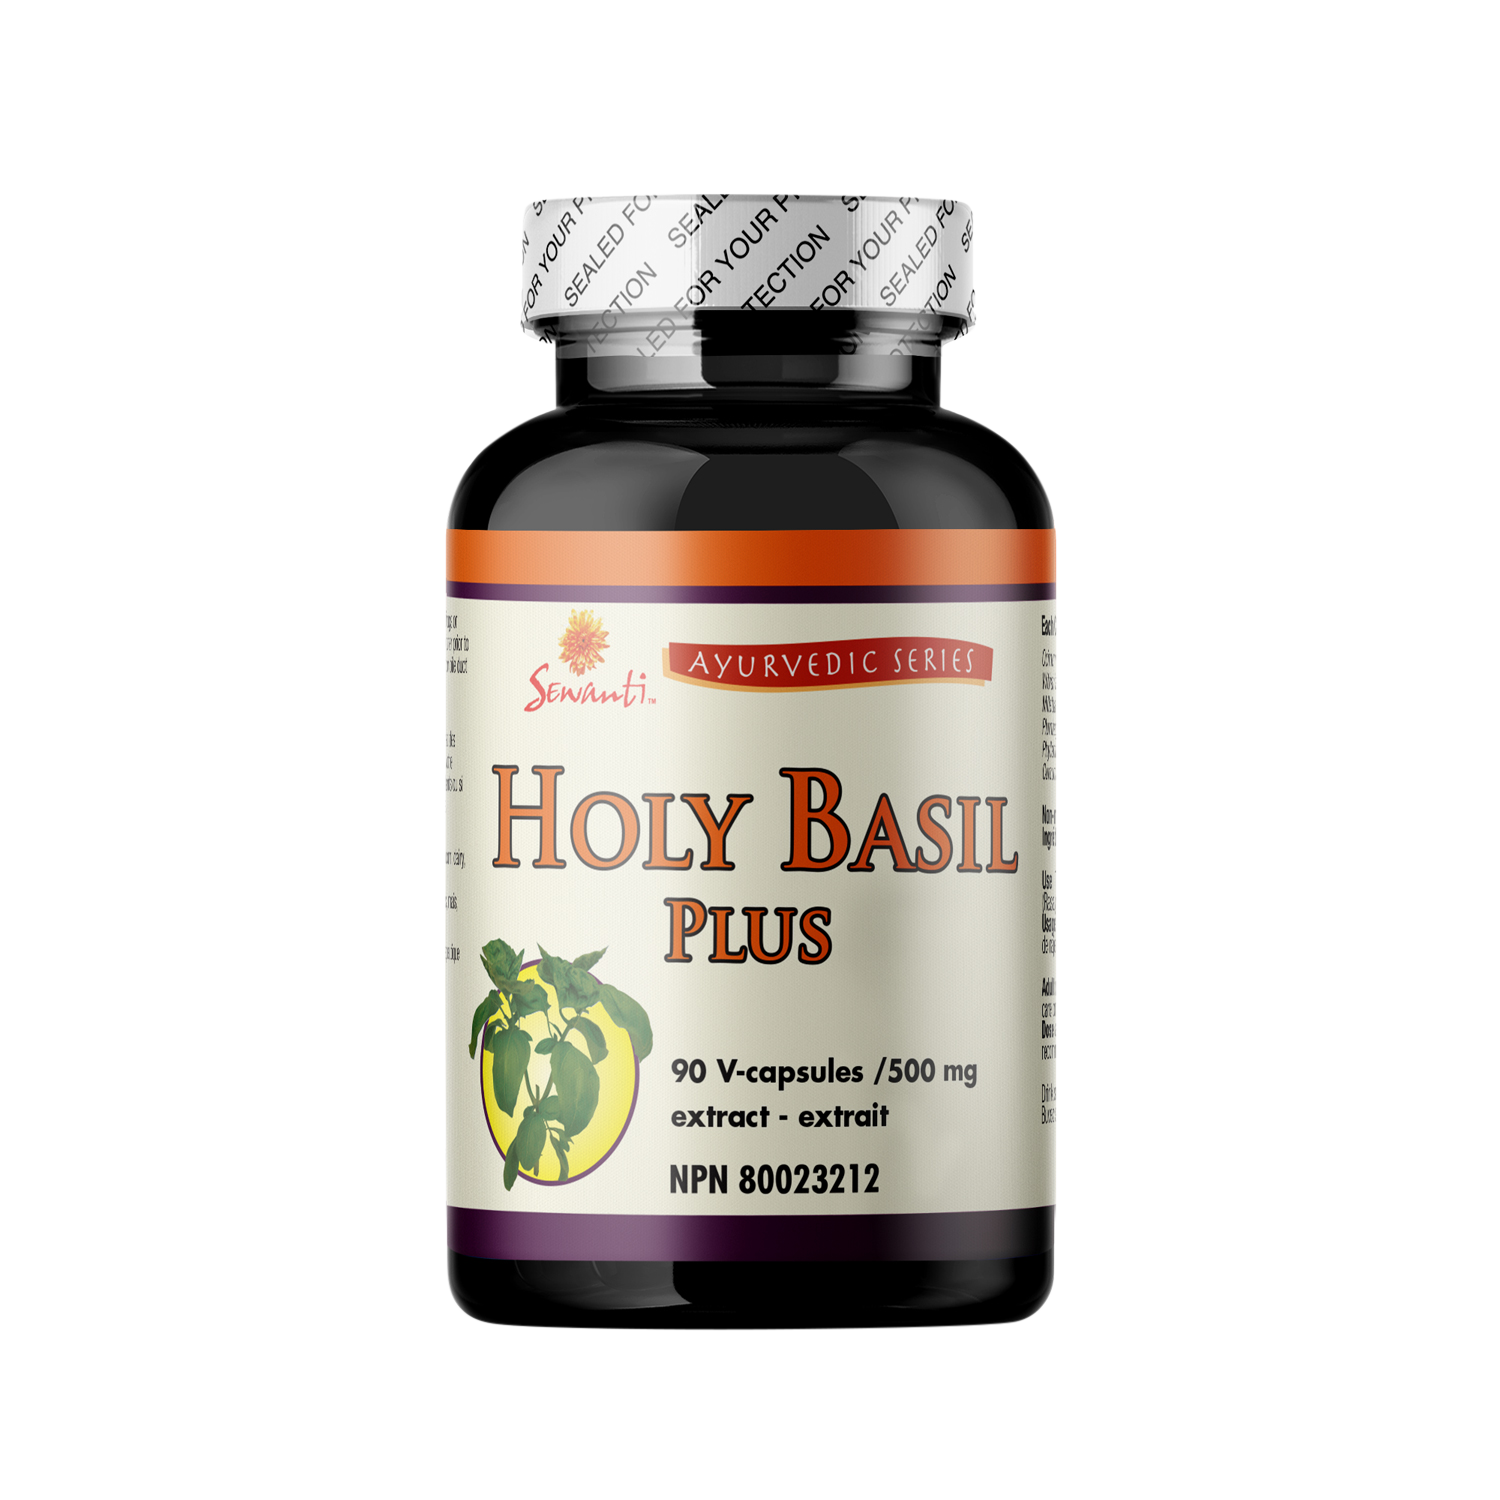 Ayurvedic Holy Basil Plus Capsules- Take 1-2 capsules 2 times a day. Take before meals or as directed by a health care practitioner.